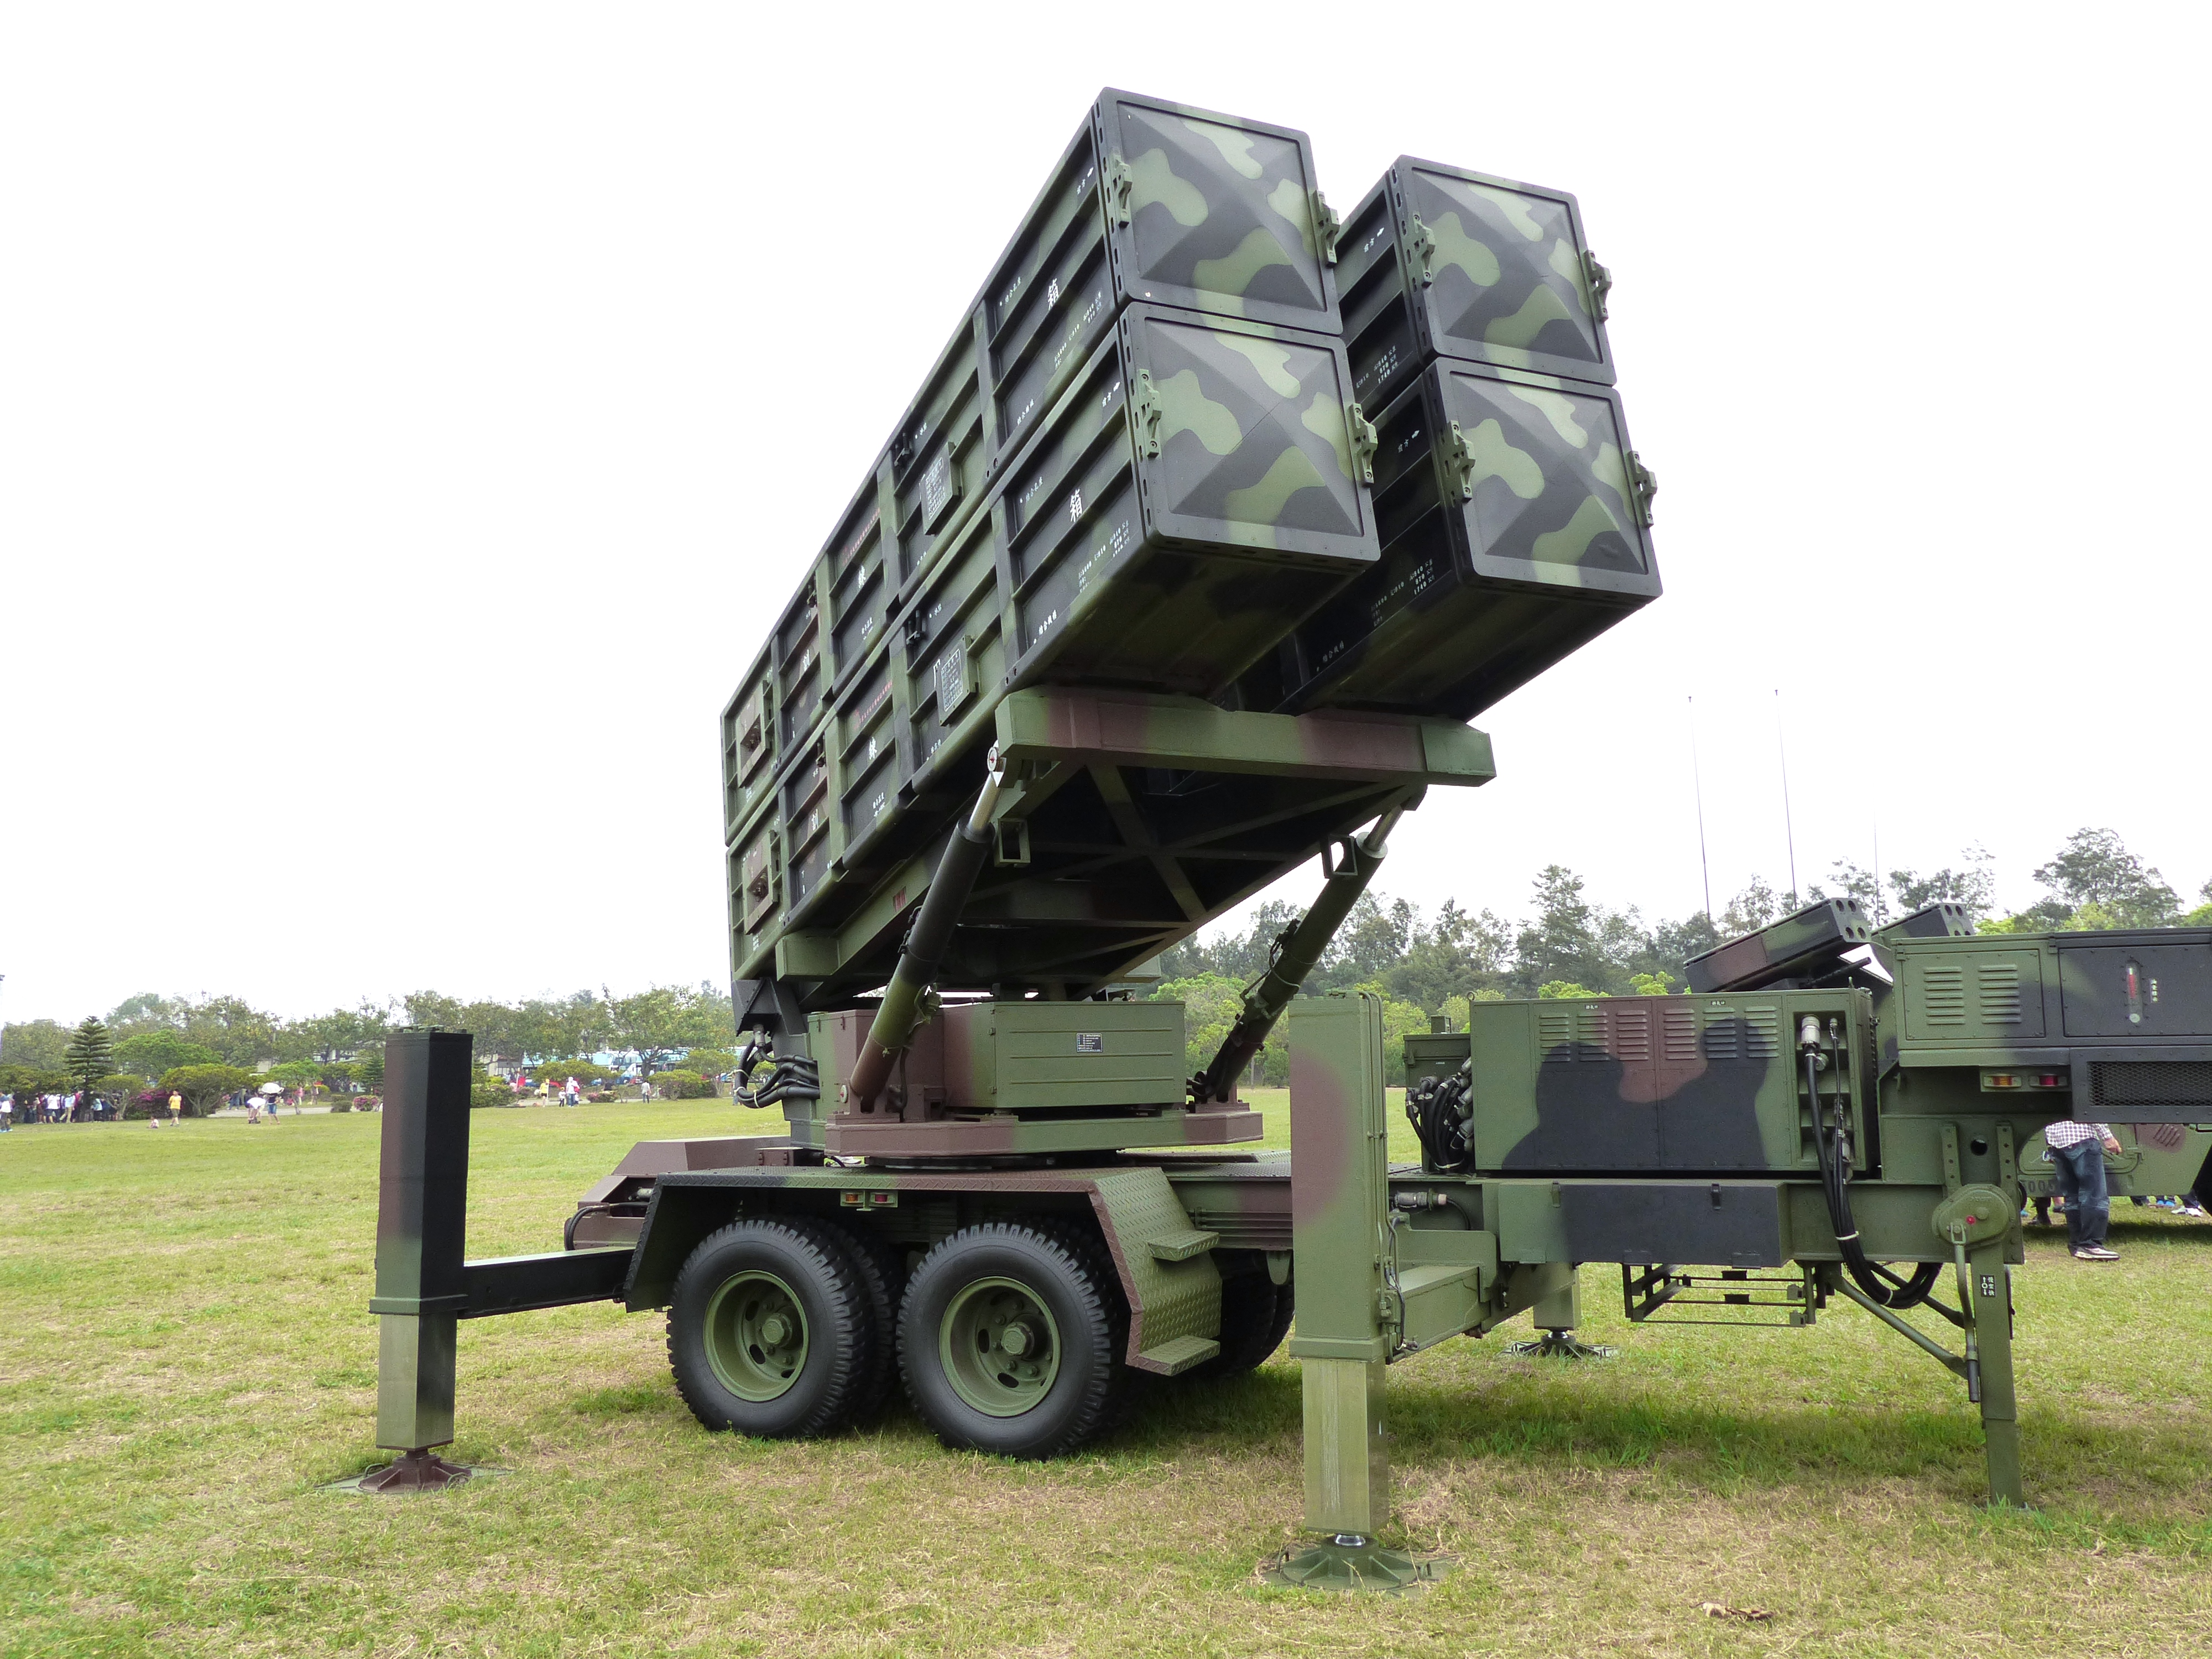 Tien_Kung_%E2%85%A1_Missile_Launcher_Display_at_Hukou_Camp_Ground_20140329b.jpg